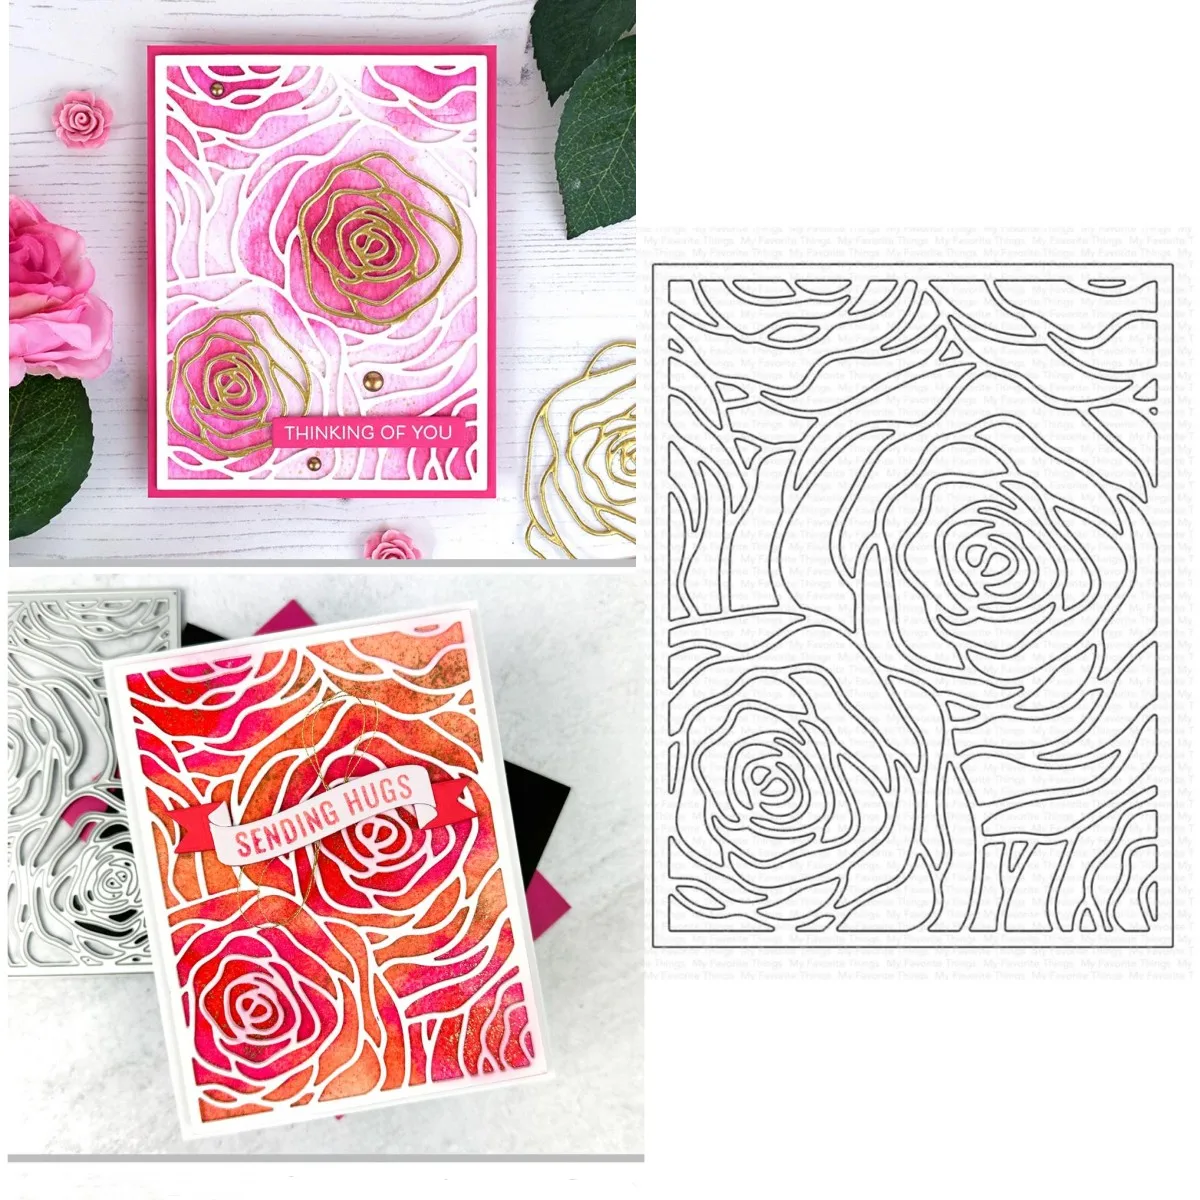 

2022 Arrival Roses All Around Cover New Metal Cutting Die Scrapbook Embossed Make Paper Card Album Diy Craft Template Decoration